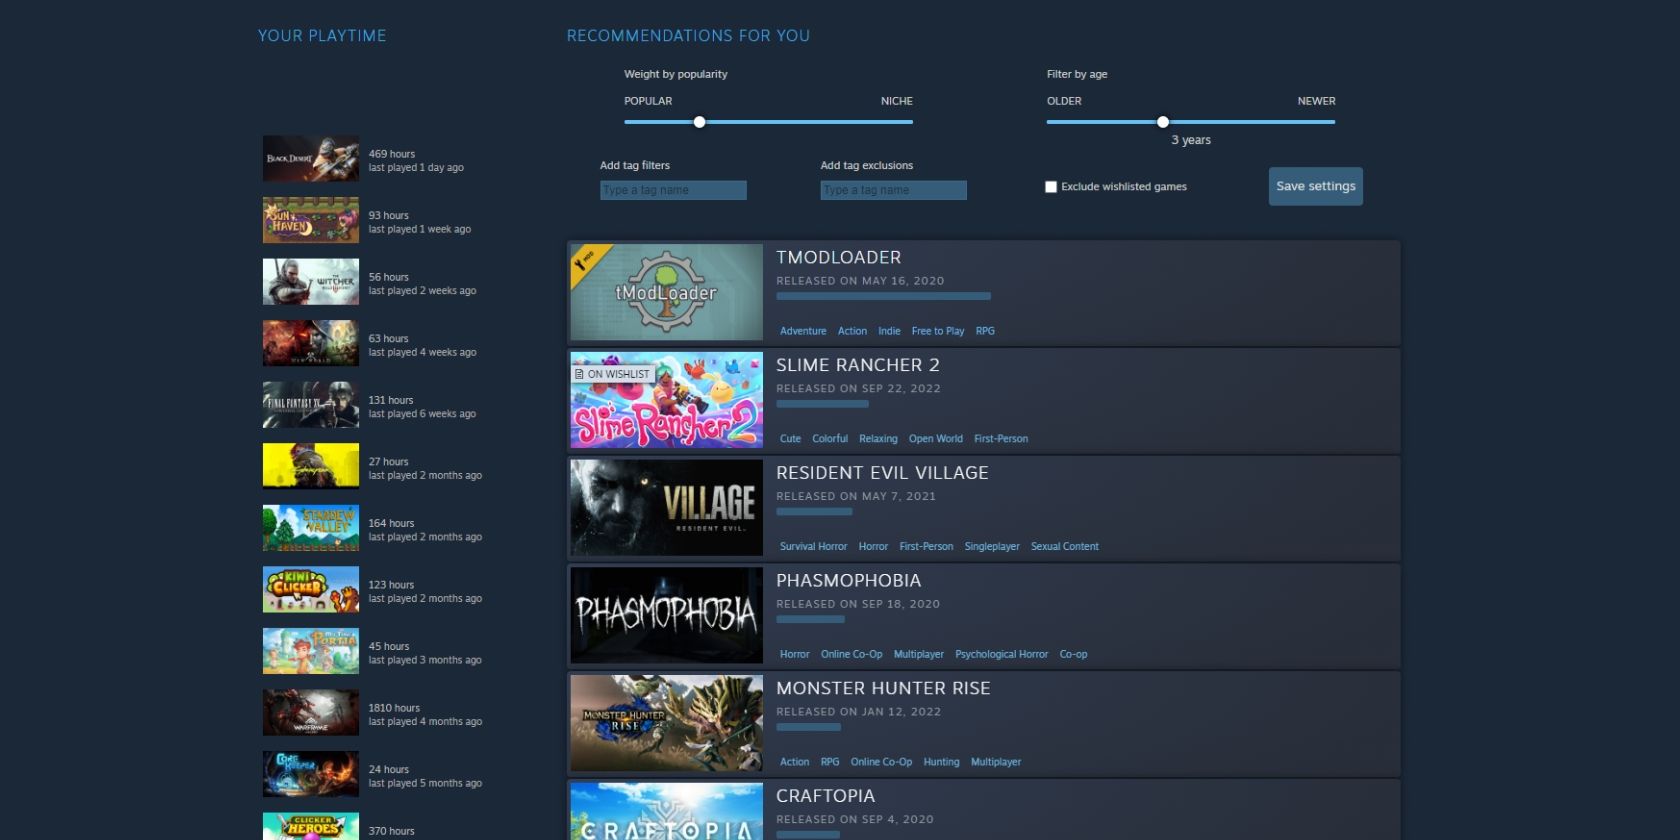 Page featuring the Steam Interactive Recommender with a list of games based on a user's preference